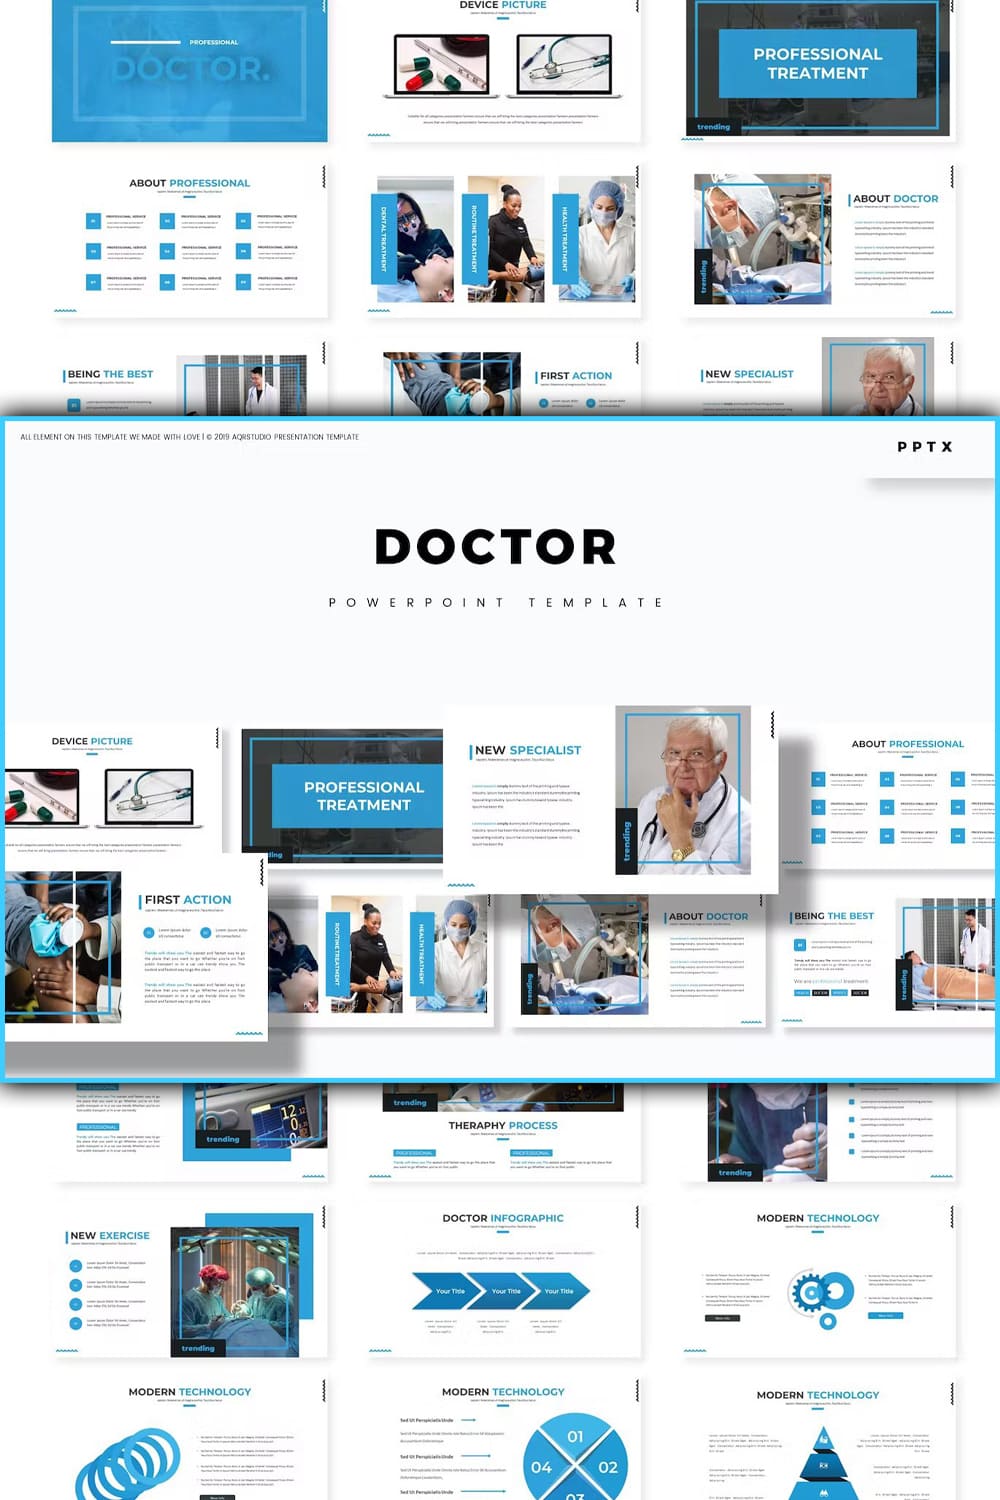 Doctor powerpoint template - pinterest image preview.